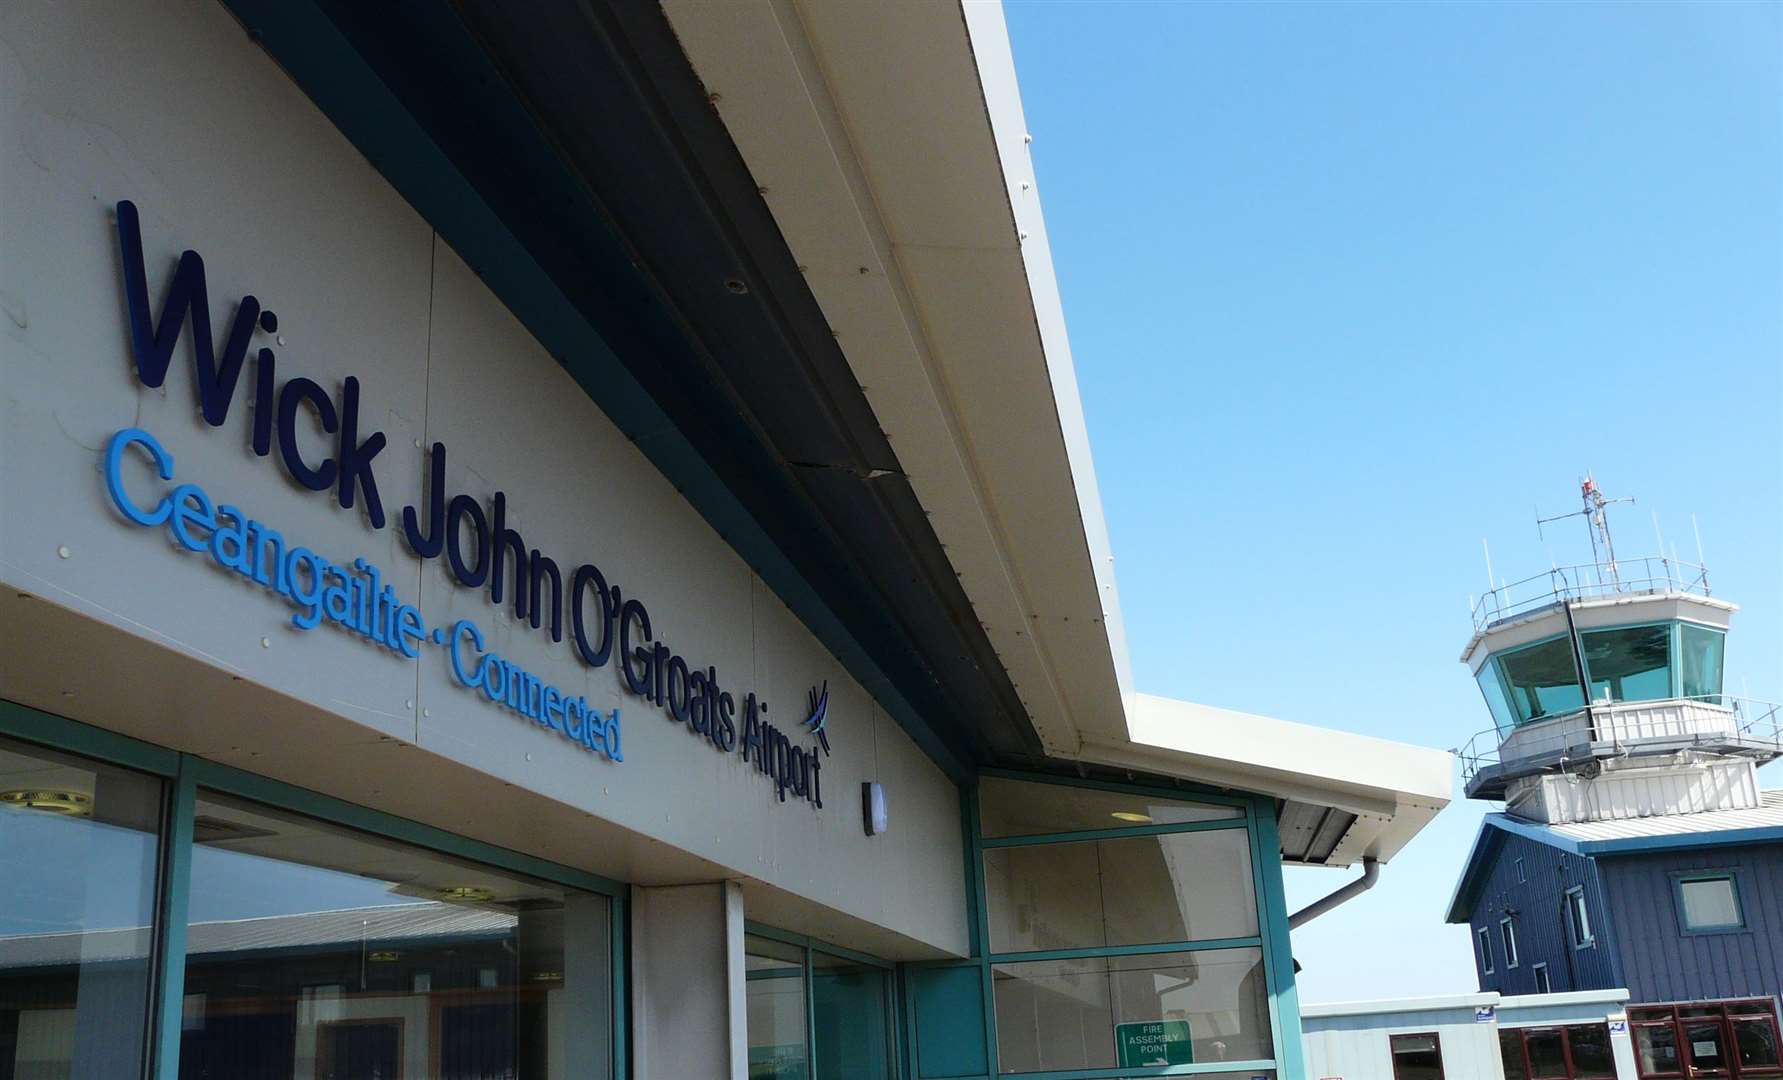 Concerns have been raised about the downgrading of services at Wick John O'Groats Airport.